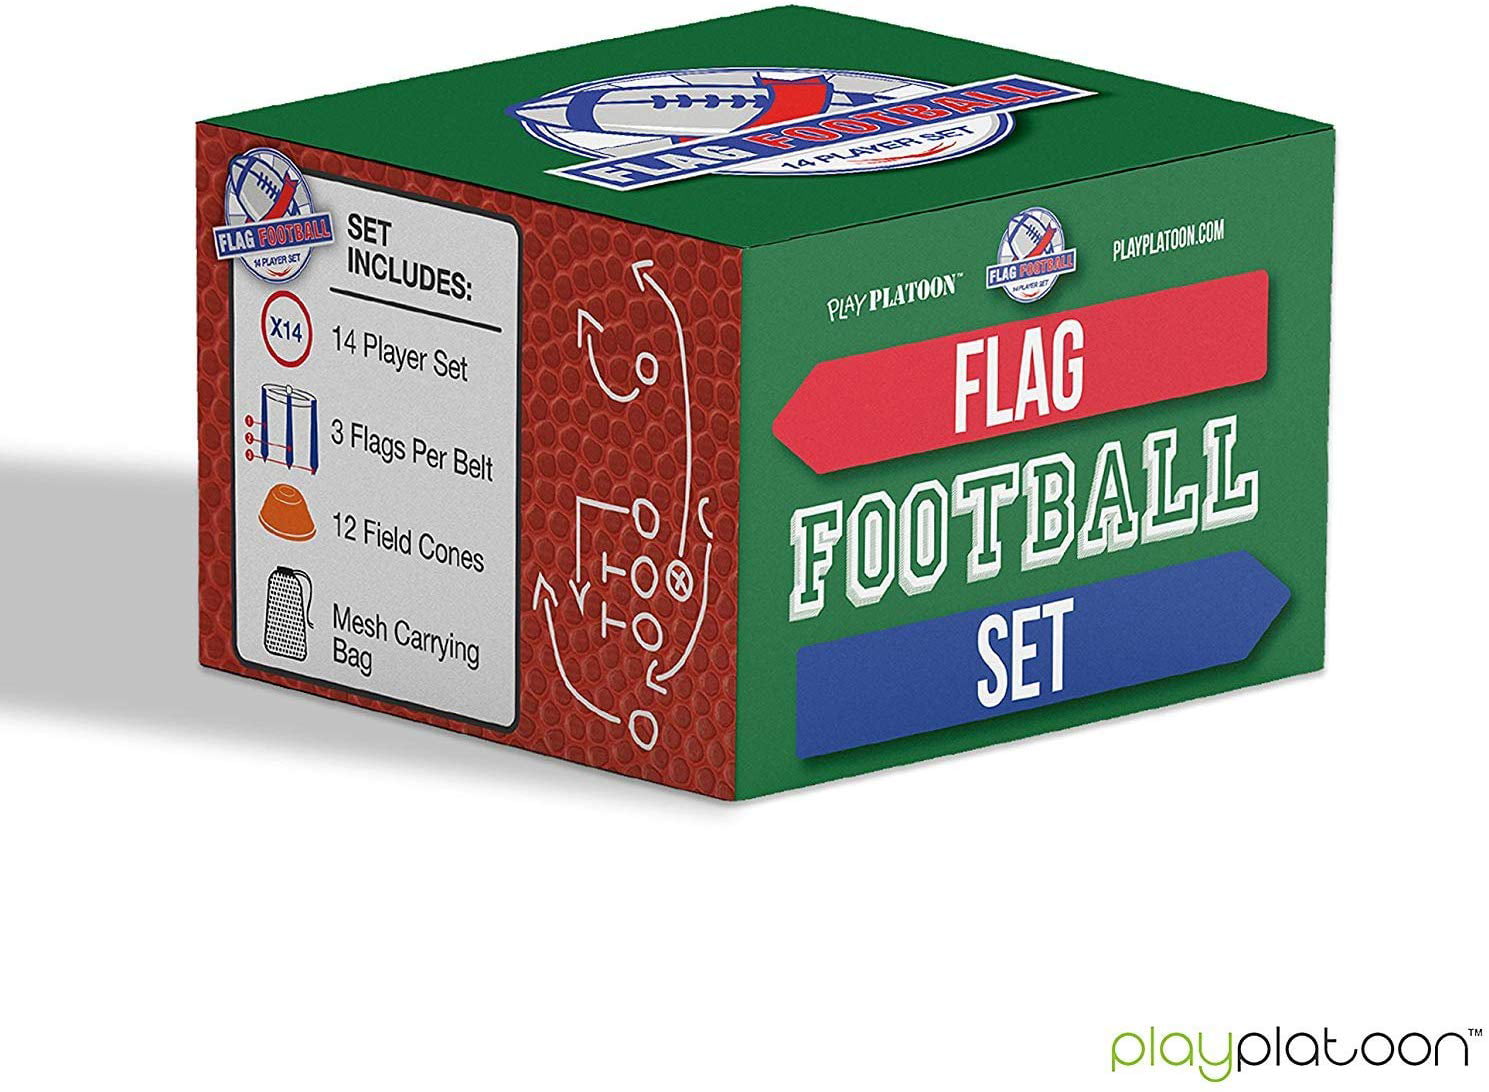 Includes 14 Belts 42 Flags and 4 Cones Easy Tear Away Belt for Kids or Adults Players of Flag Football 21 Red & 21 Blue Flags Flag Football Set 14 Player Flag Football Belts and Flags Set 